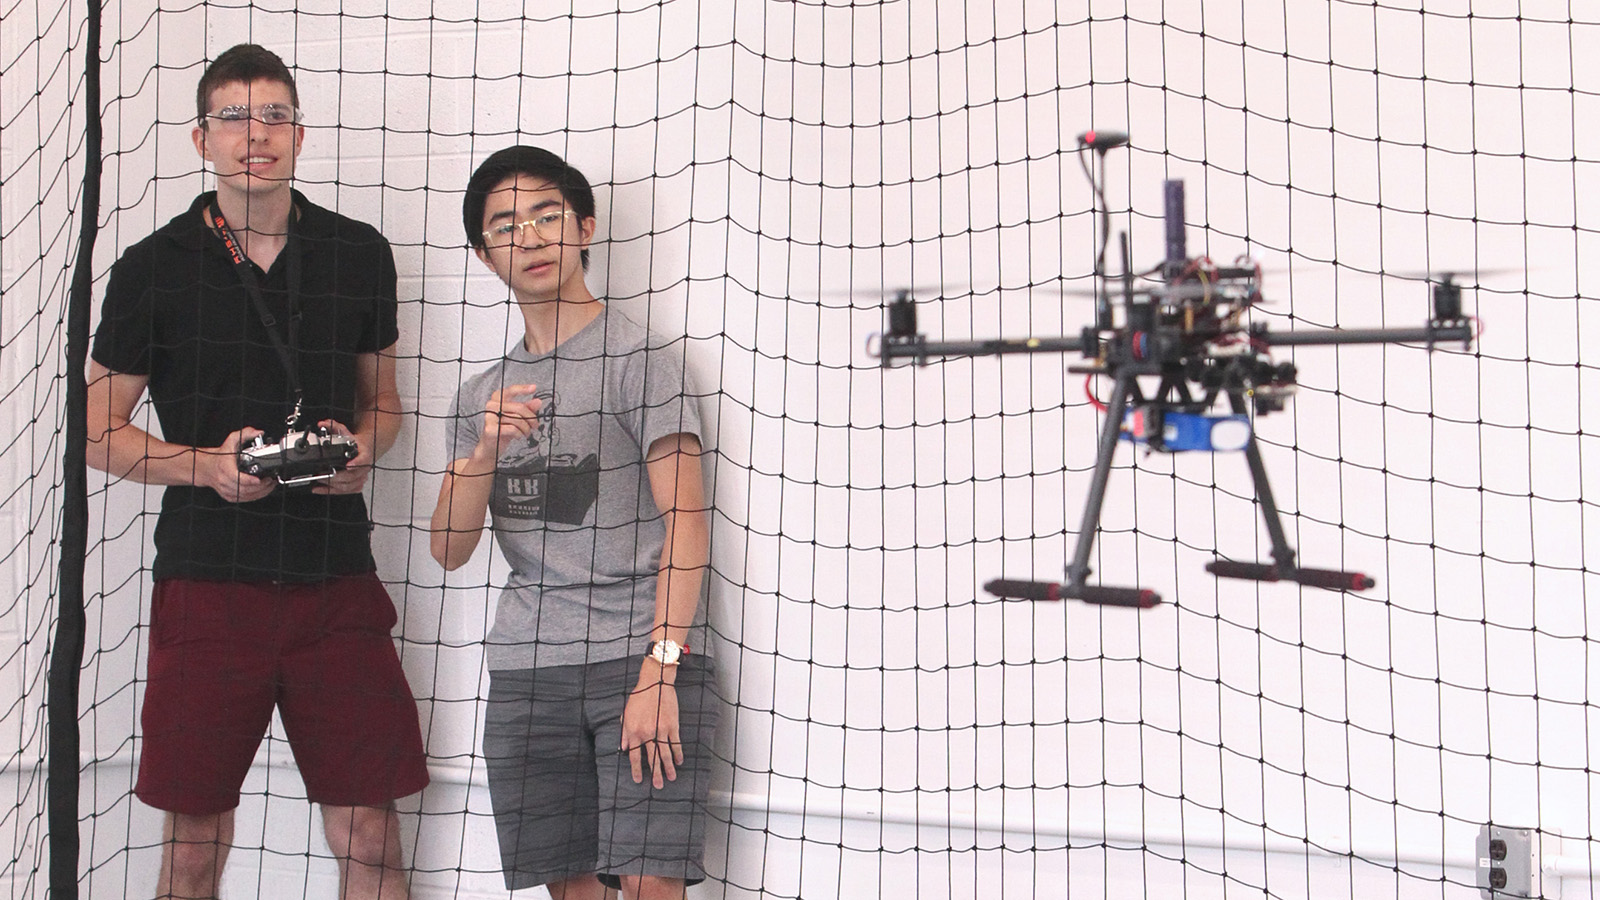 Two students behind mesh curtain flow drone, which is in foreground